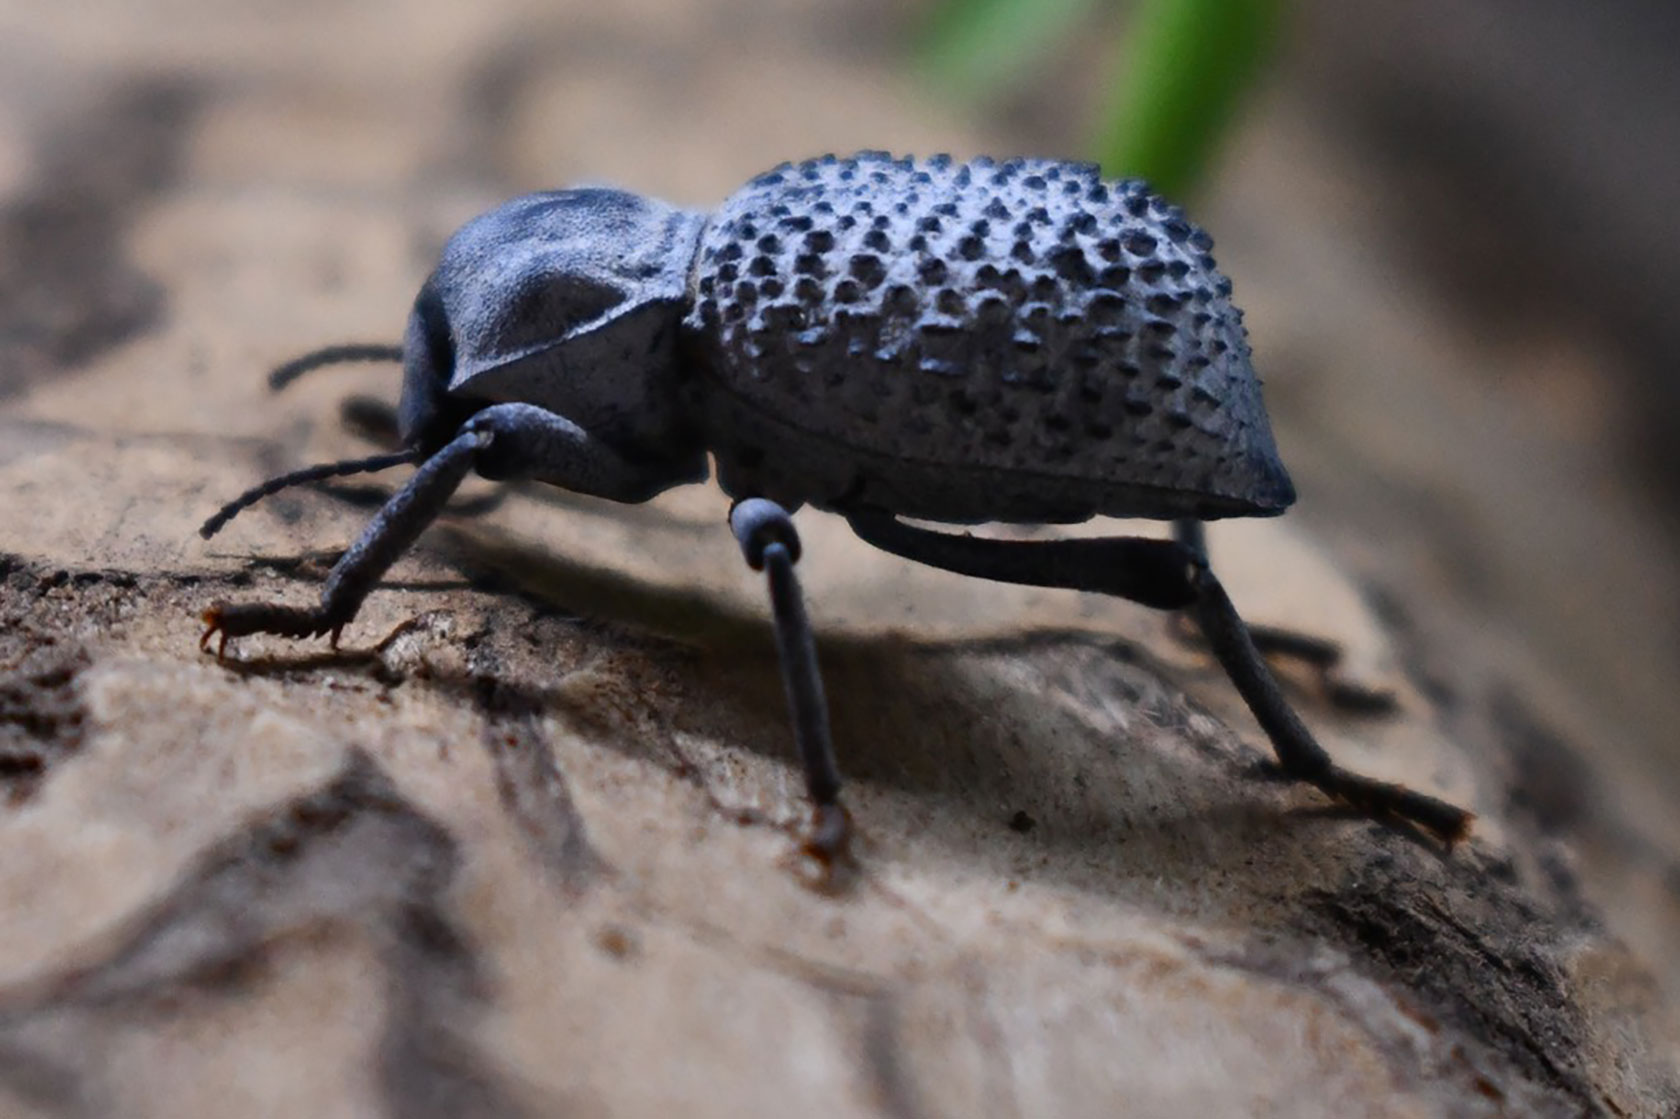 Blue death-feigning beetle up-close